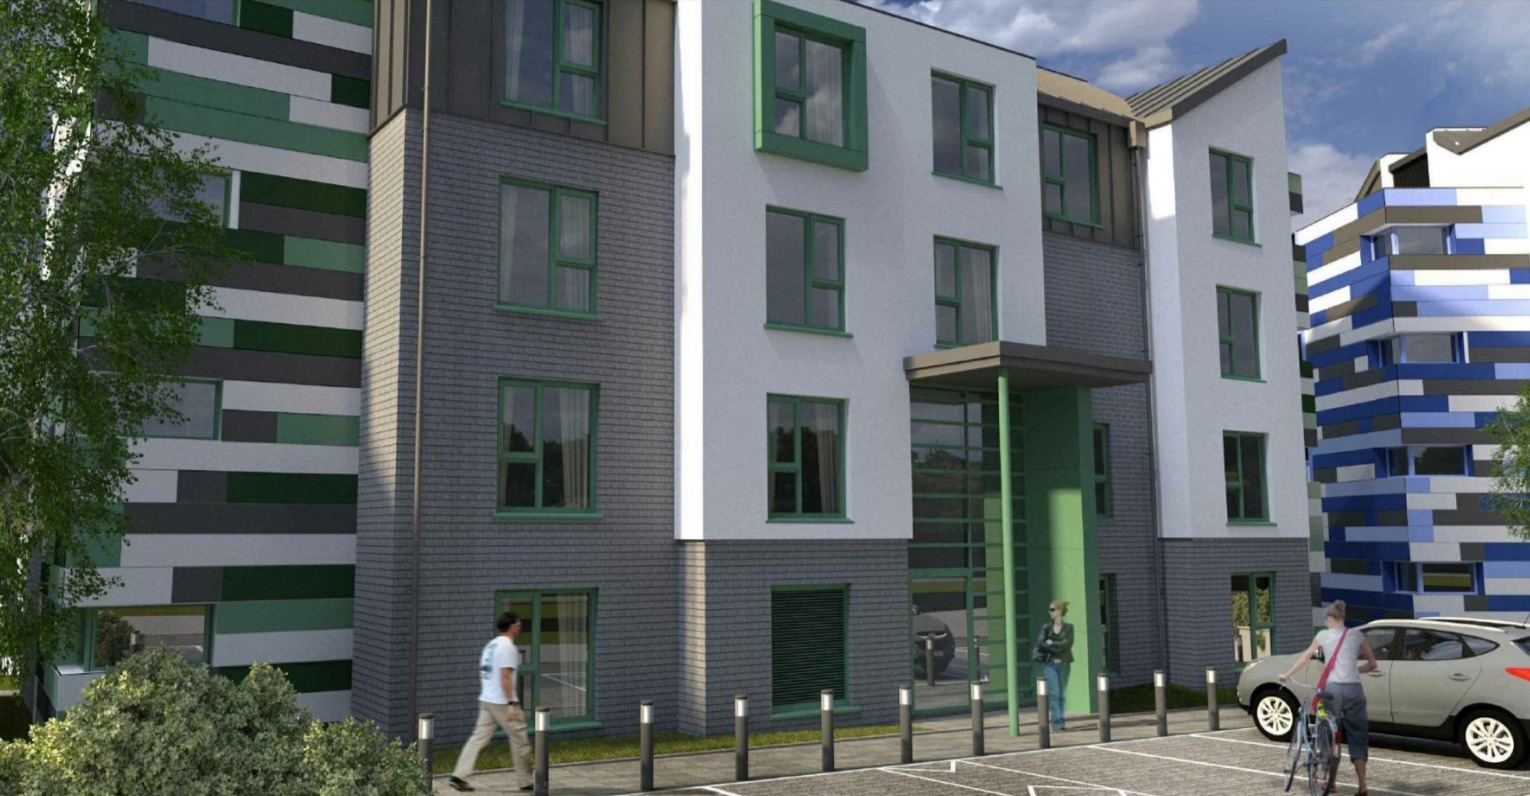 3D image of the planned student and nurse accommodation blocks in Truro